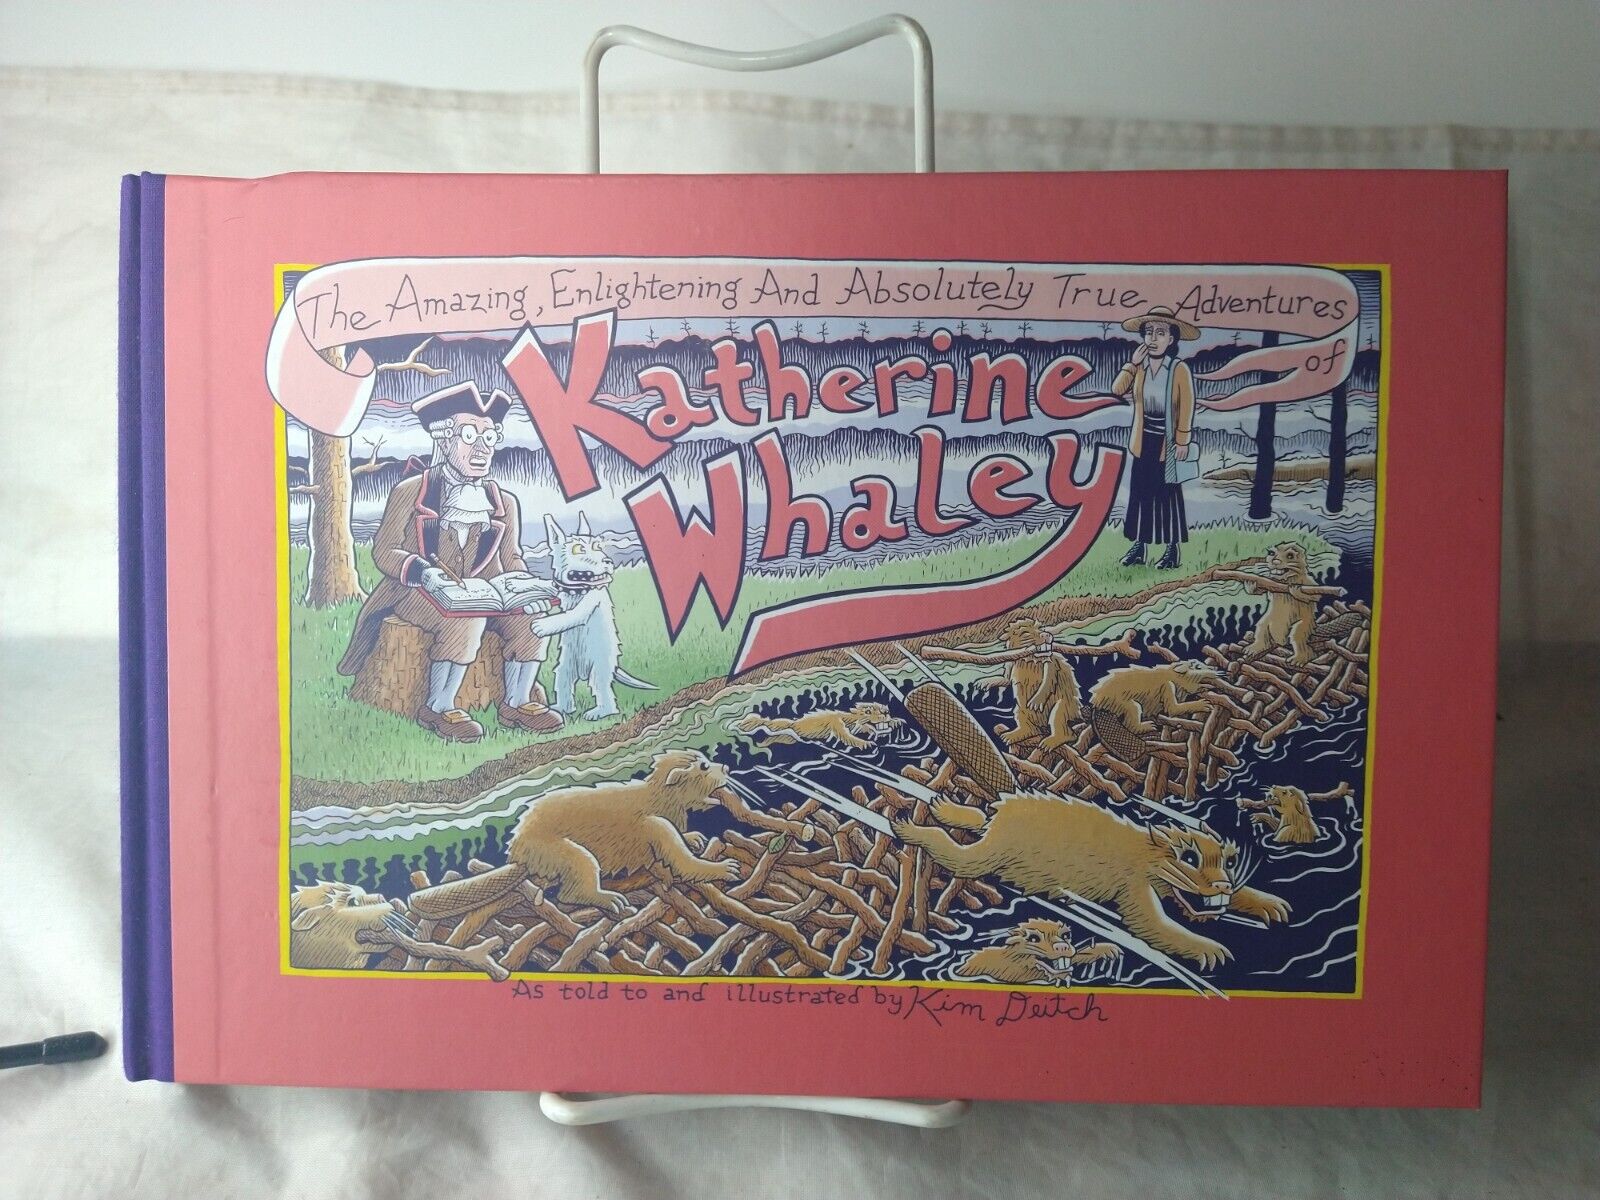 The Amazing, Enlightening And Absolutely True Adventures of Katherine Whaley